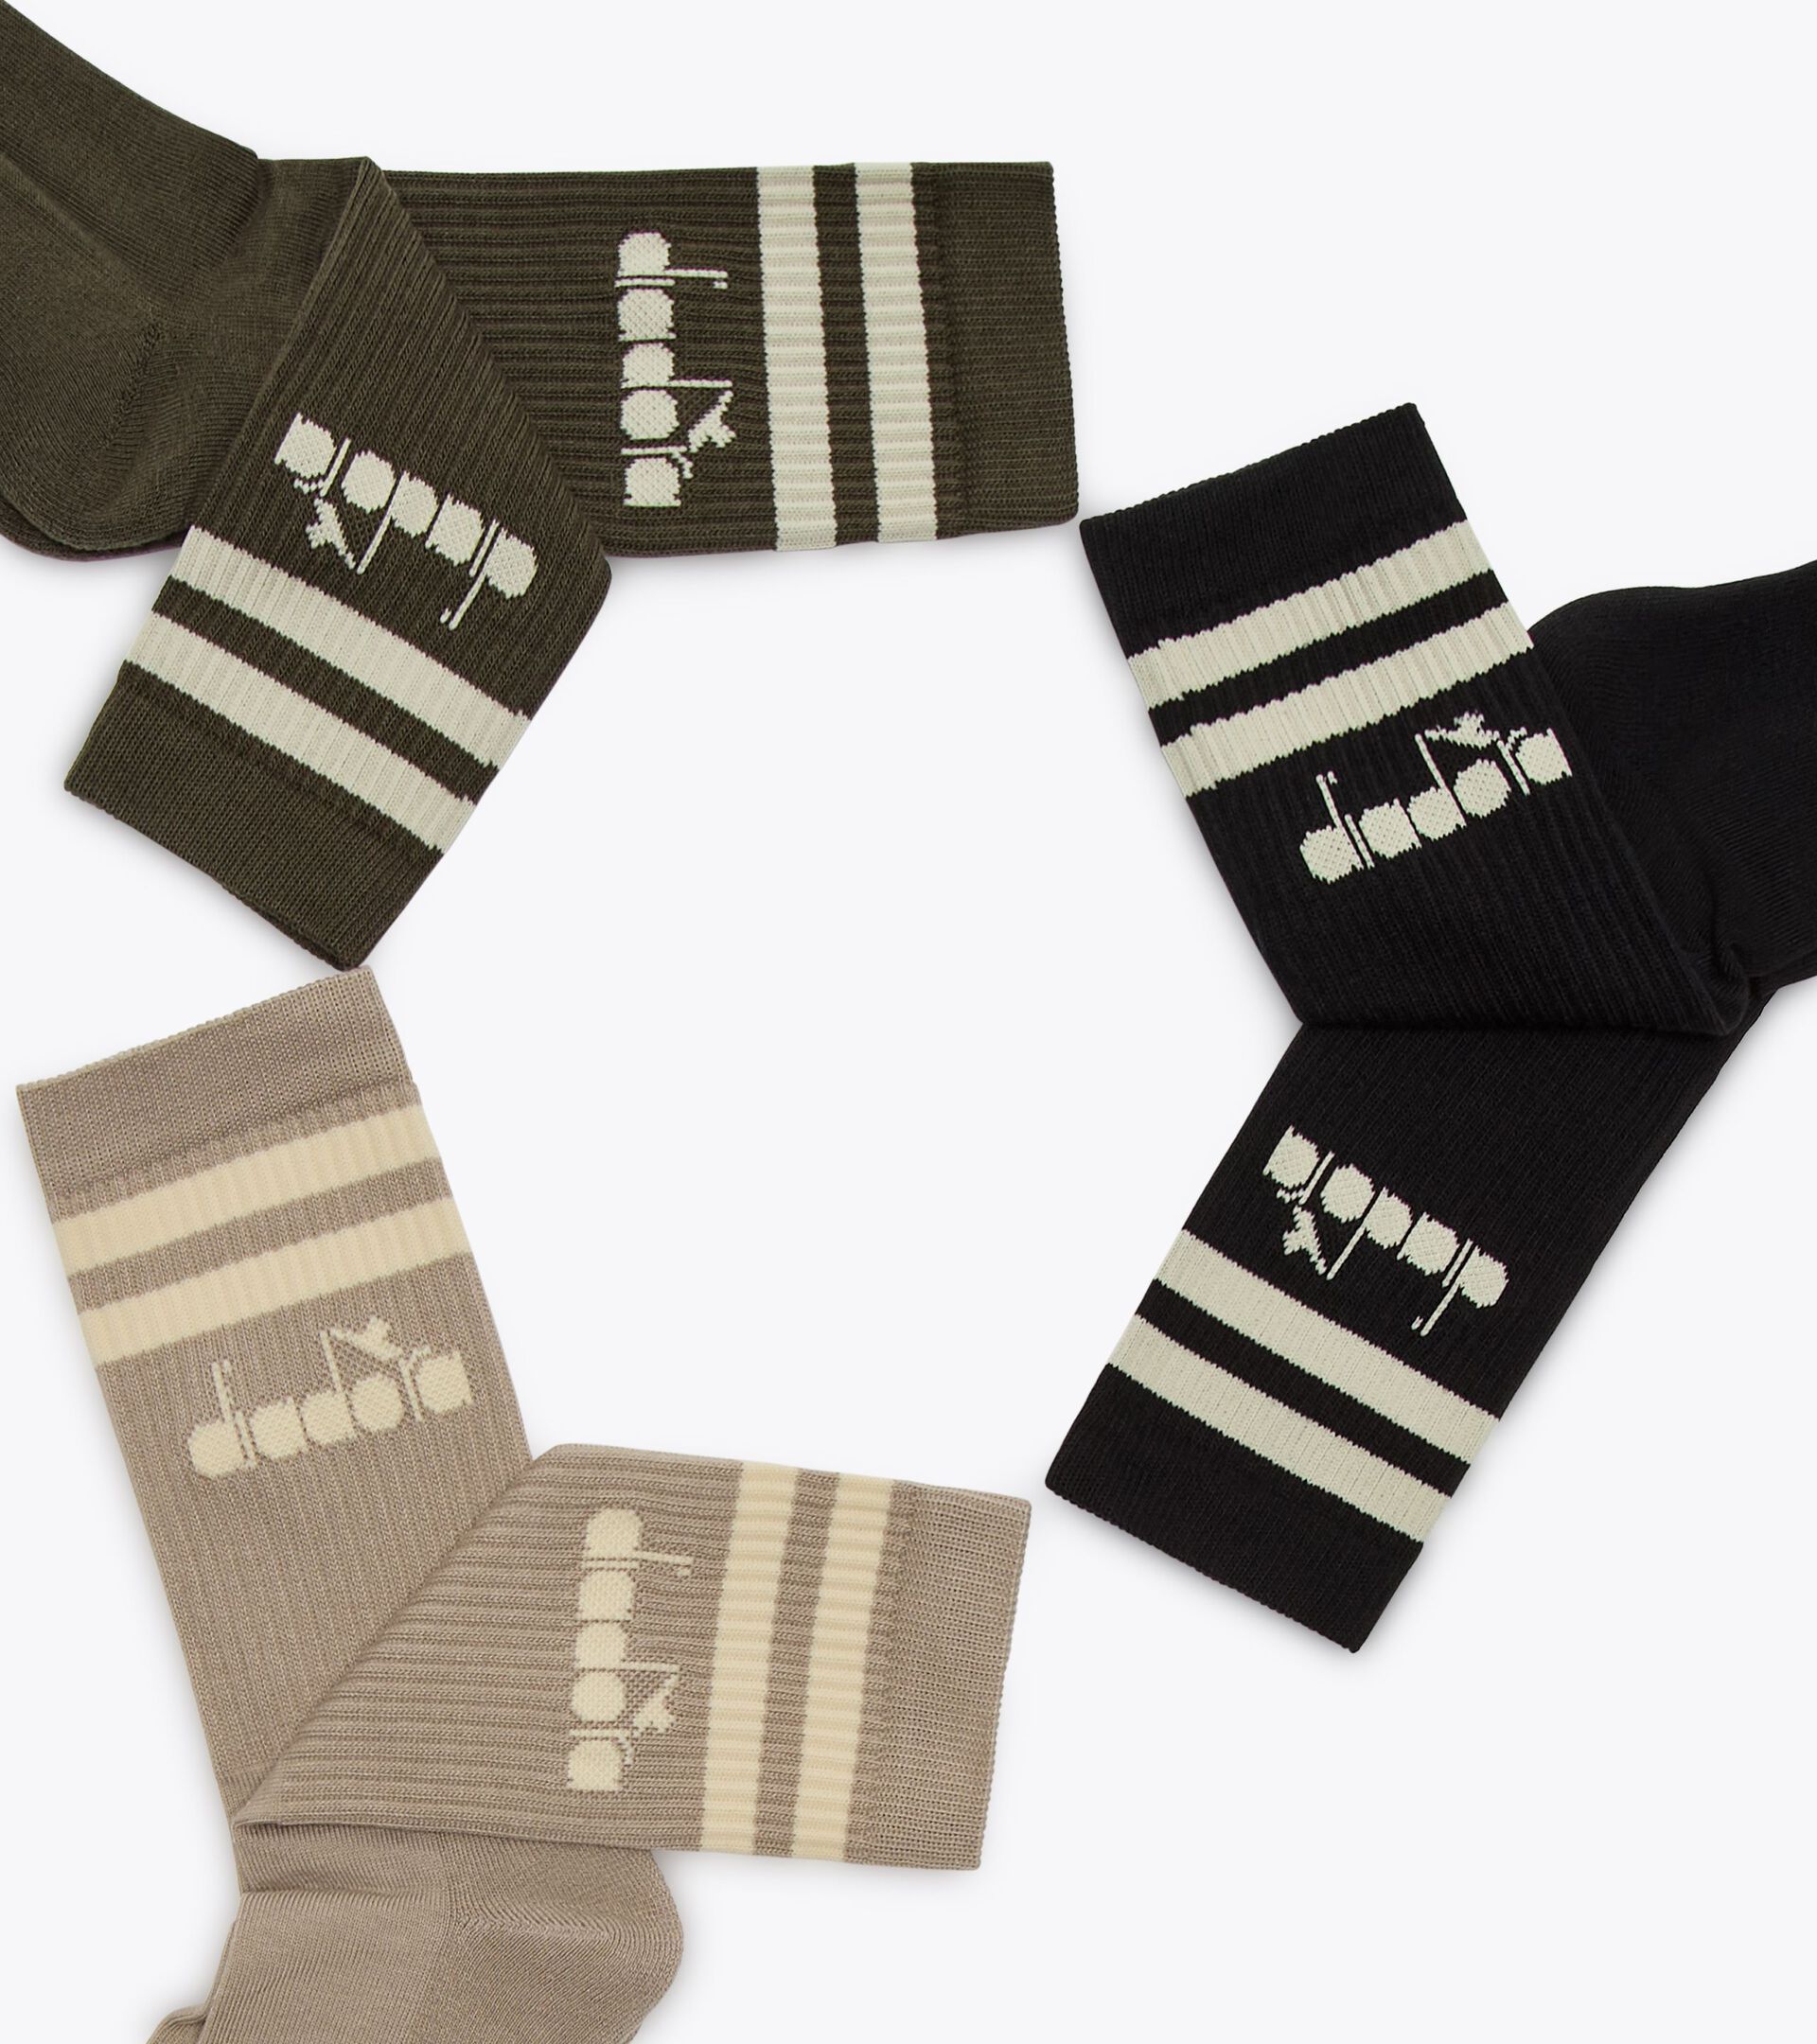 Juego de calcetines - Made in Italy SOCKS 3PACK LEGACY DIA LLUVIOSO/NGRO/OLIVA MILIT - Diadora